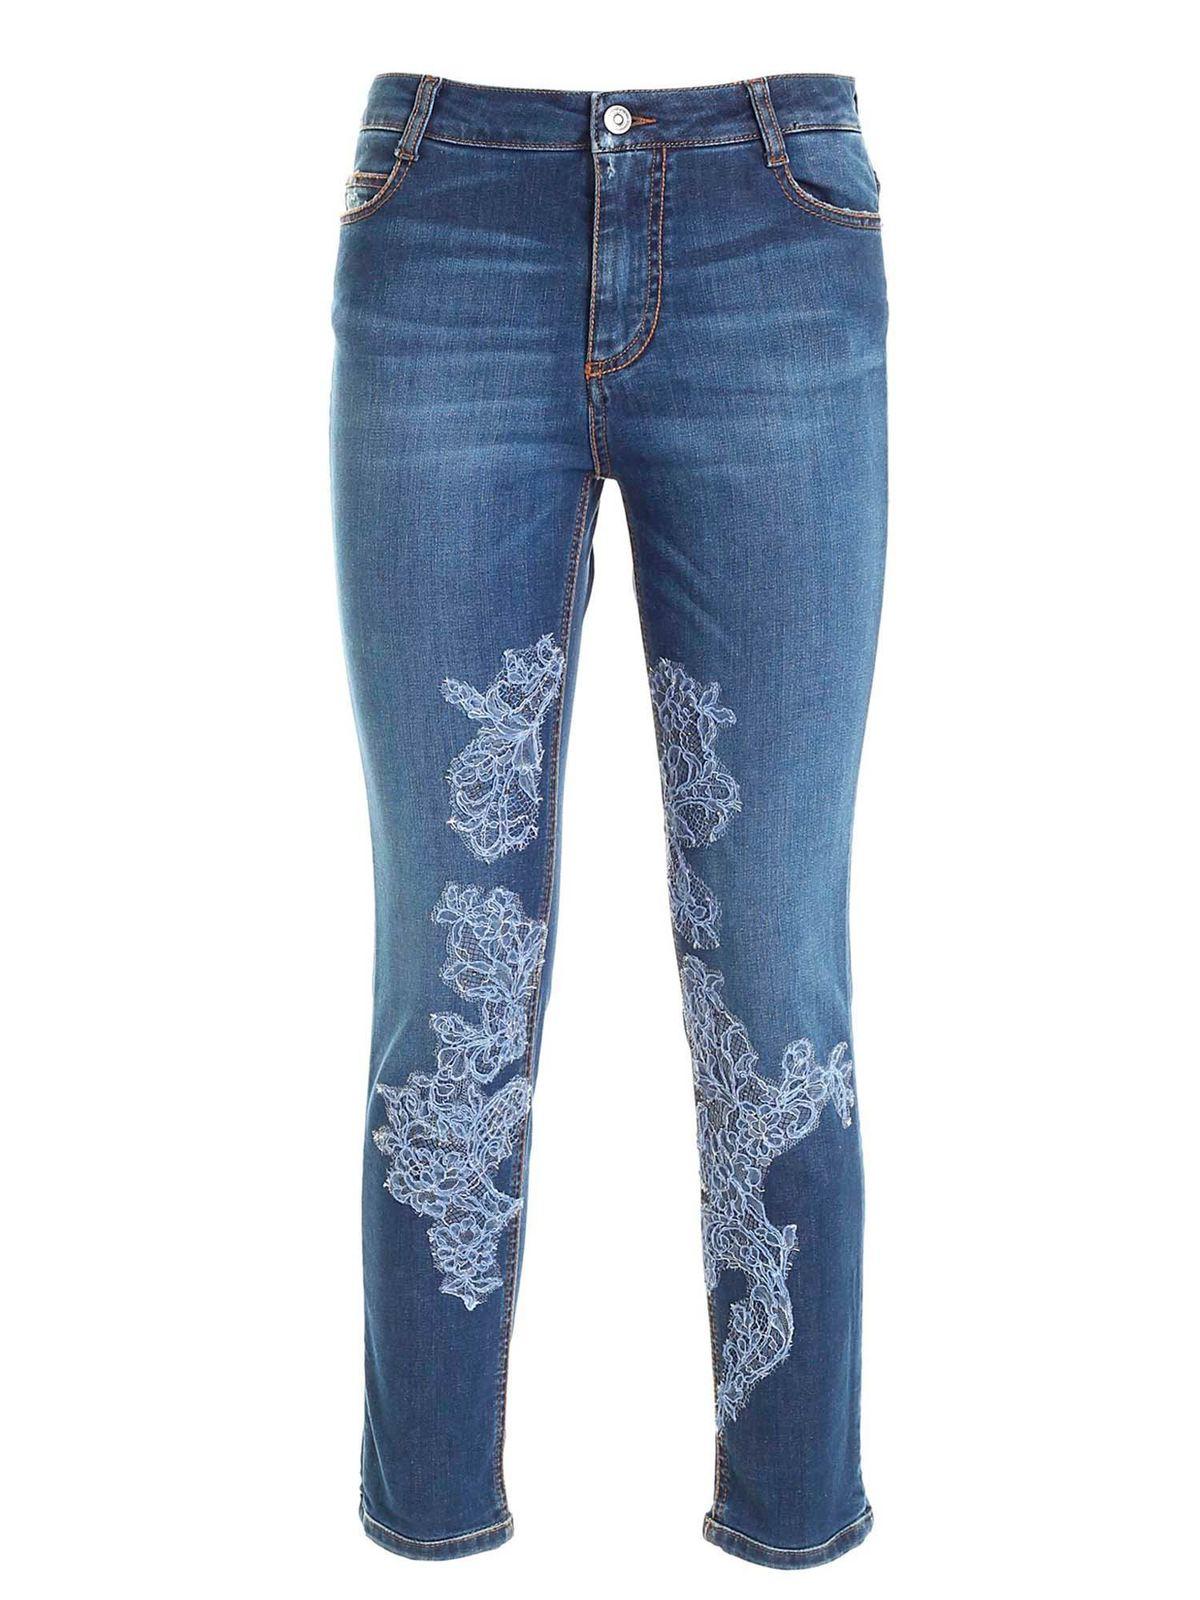 Ermanno Scervino Lace And Rhinestones Jeans In Blue - Lyst